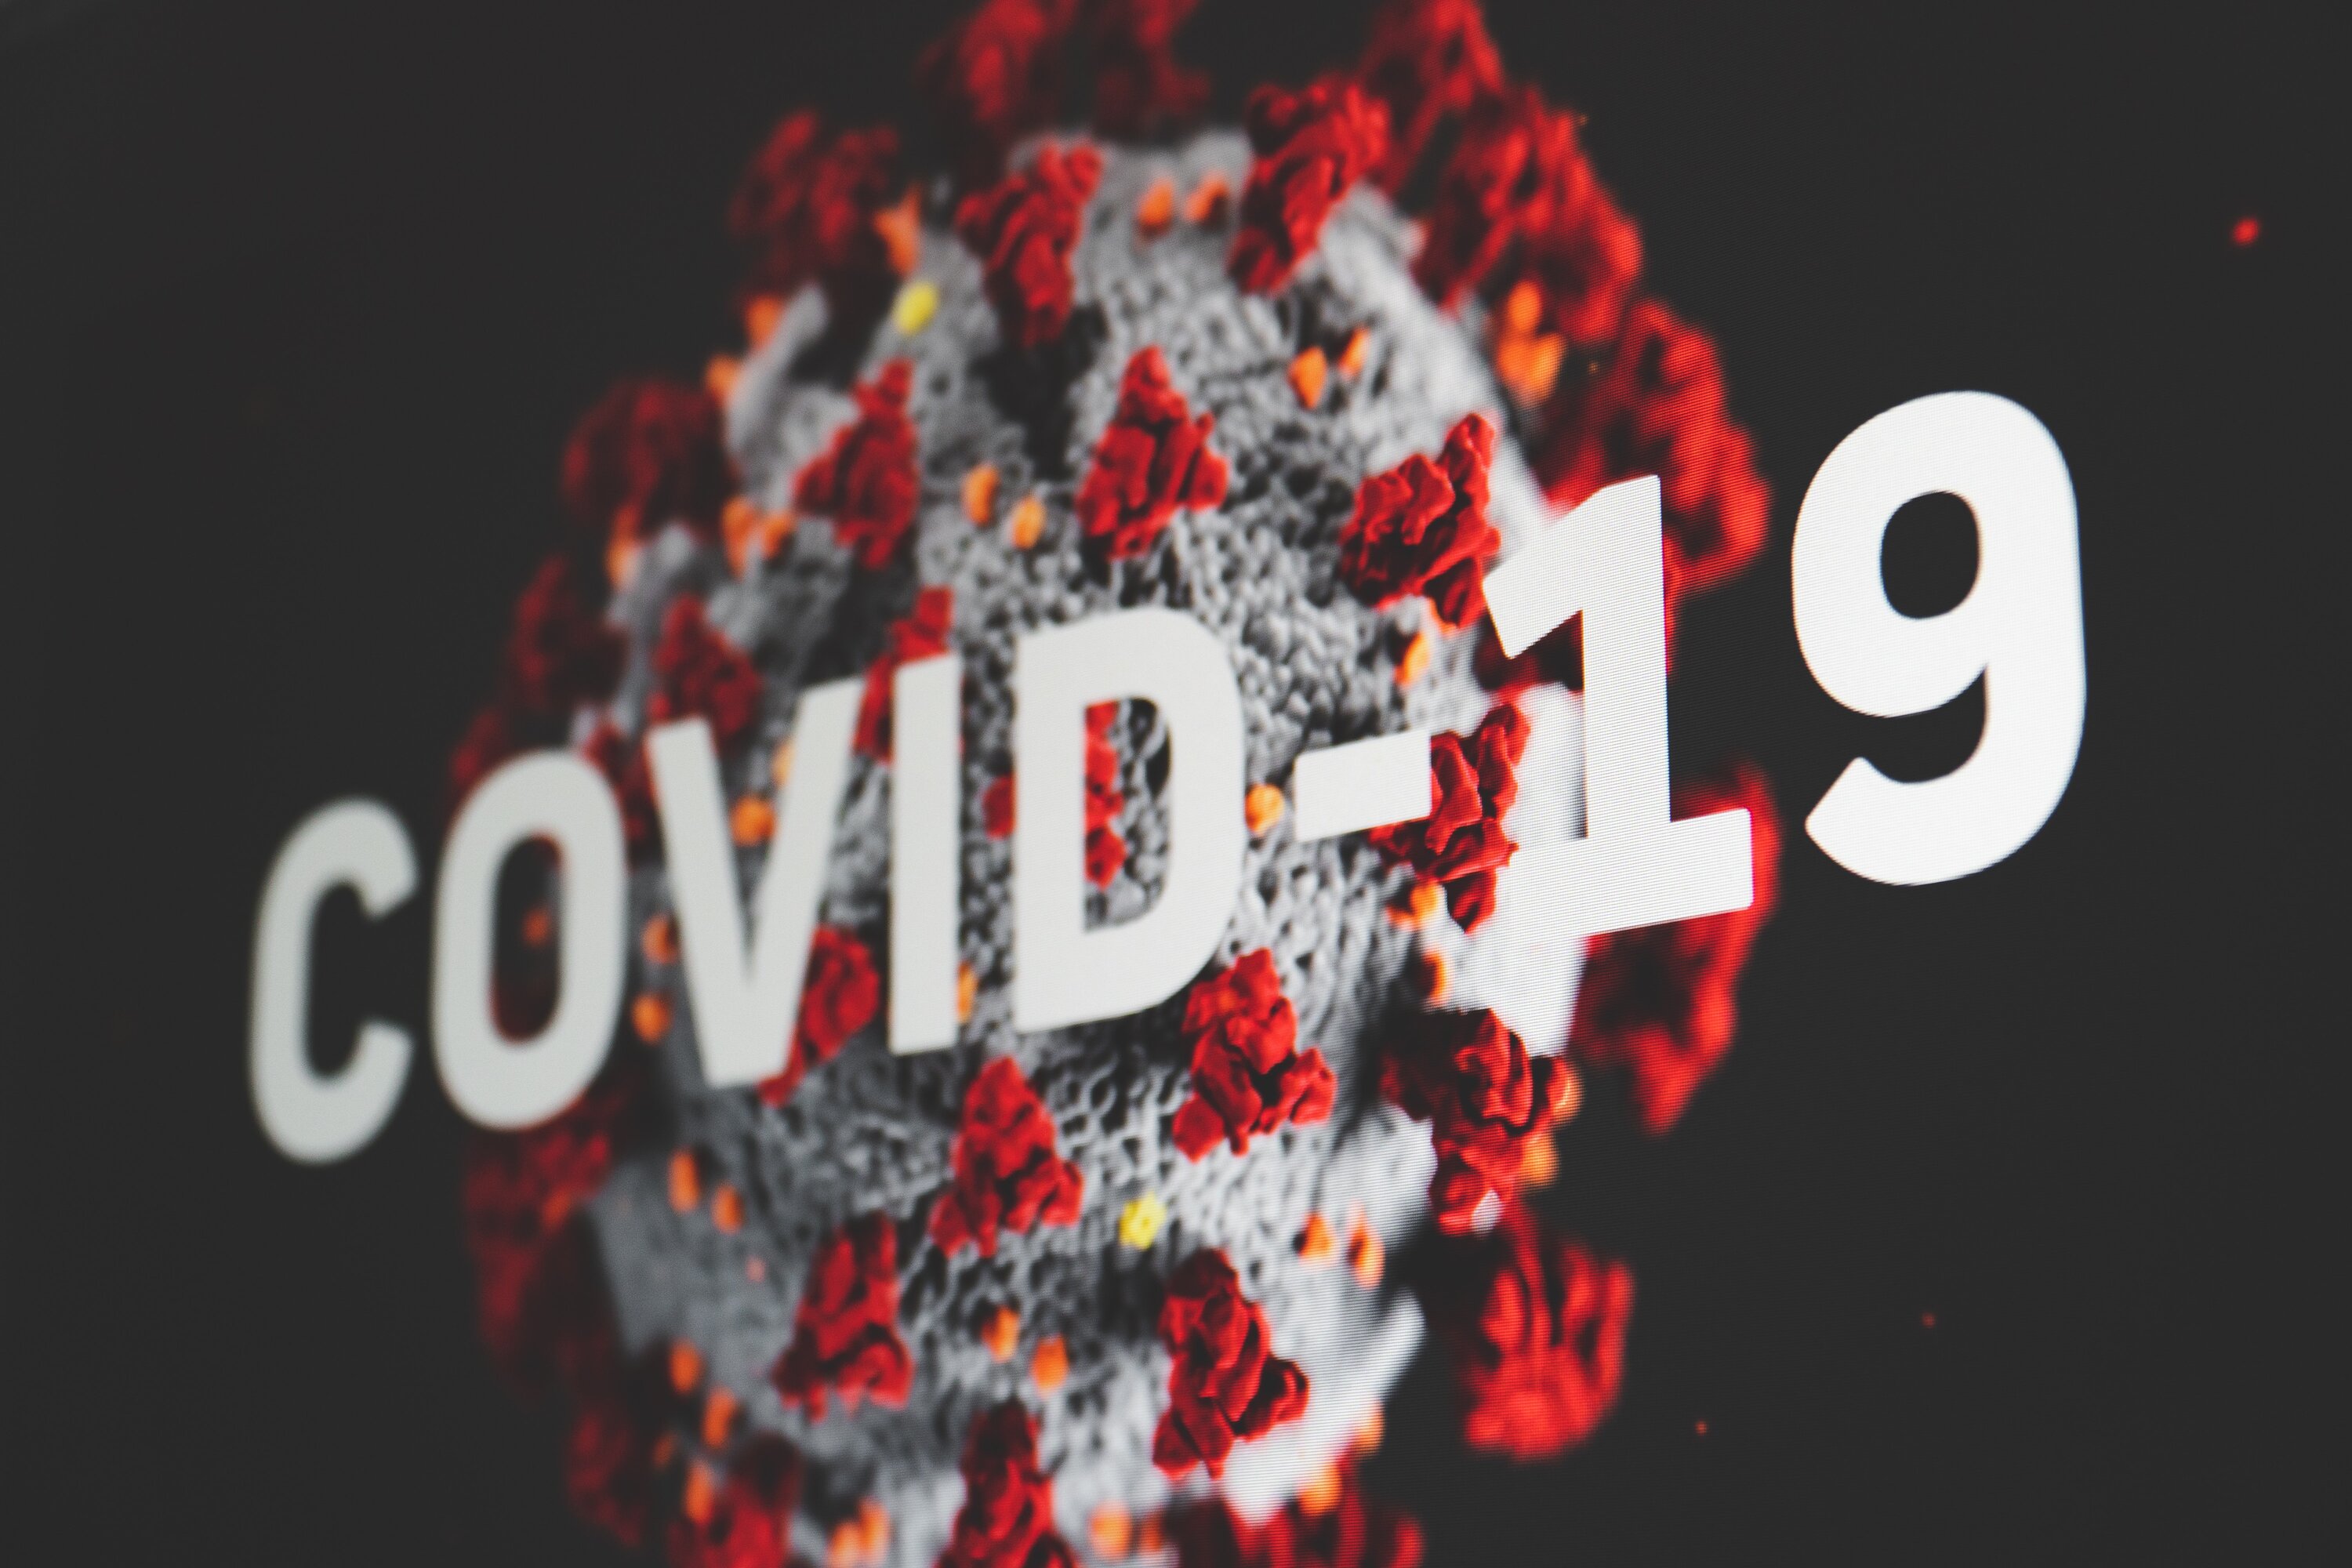 Event invitation: Global Supply Chain resiliency in the wake of the COVID-19 pandemic